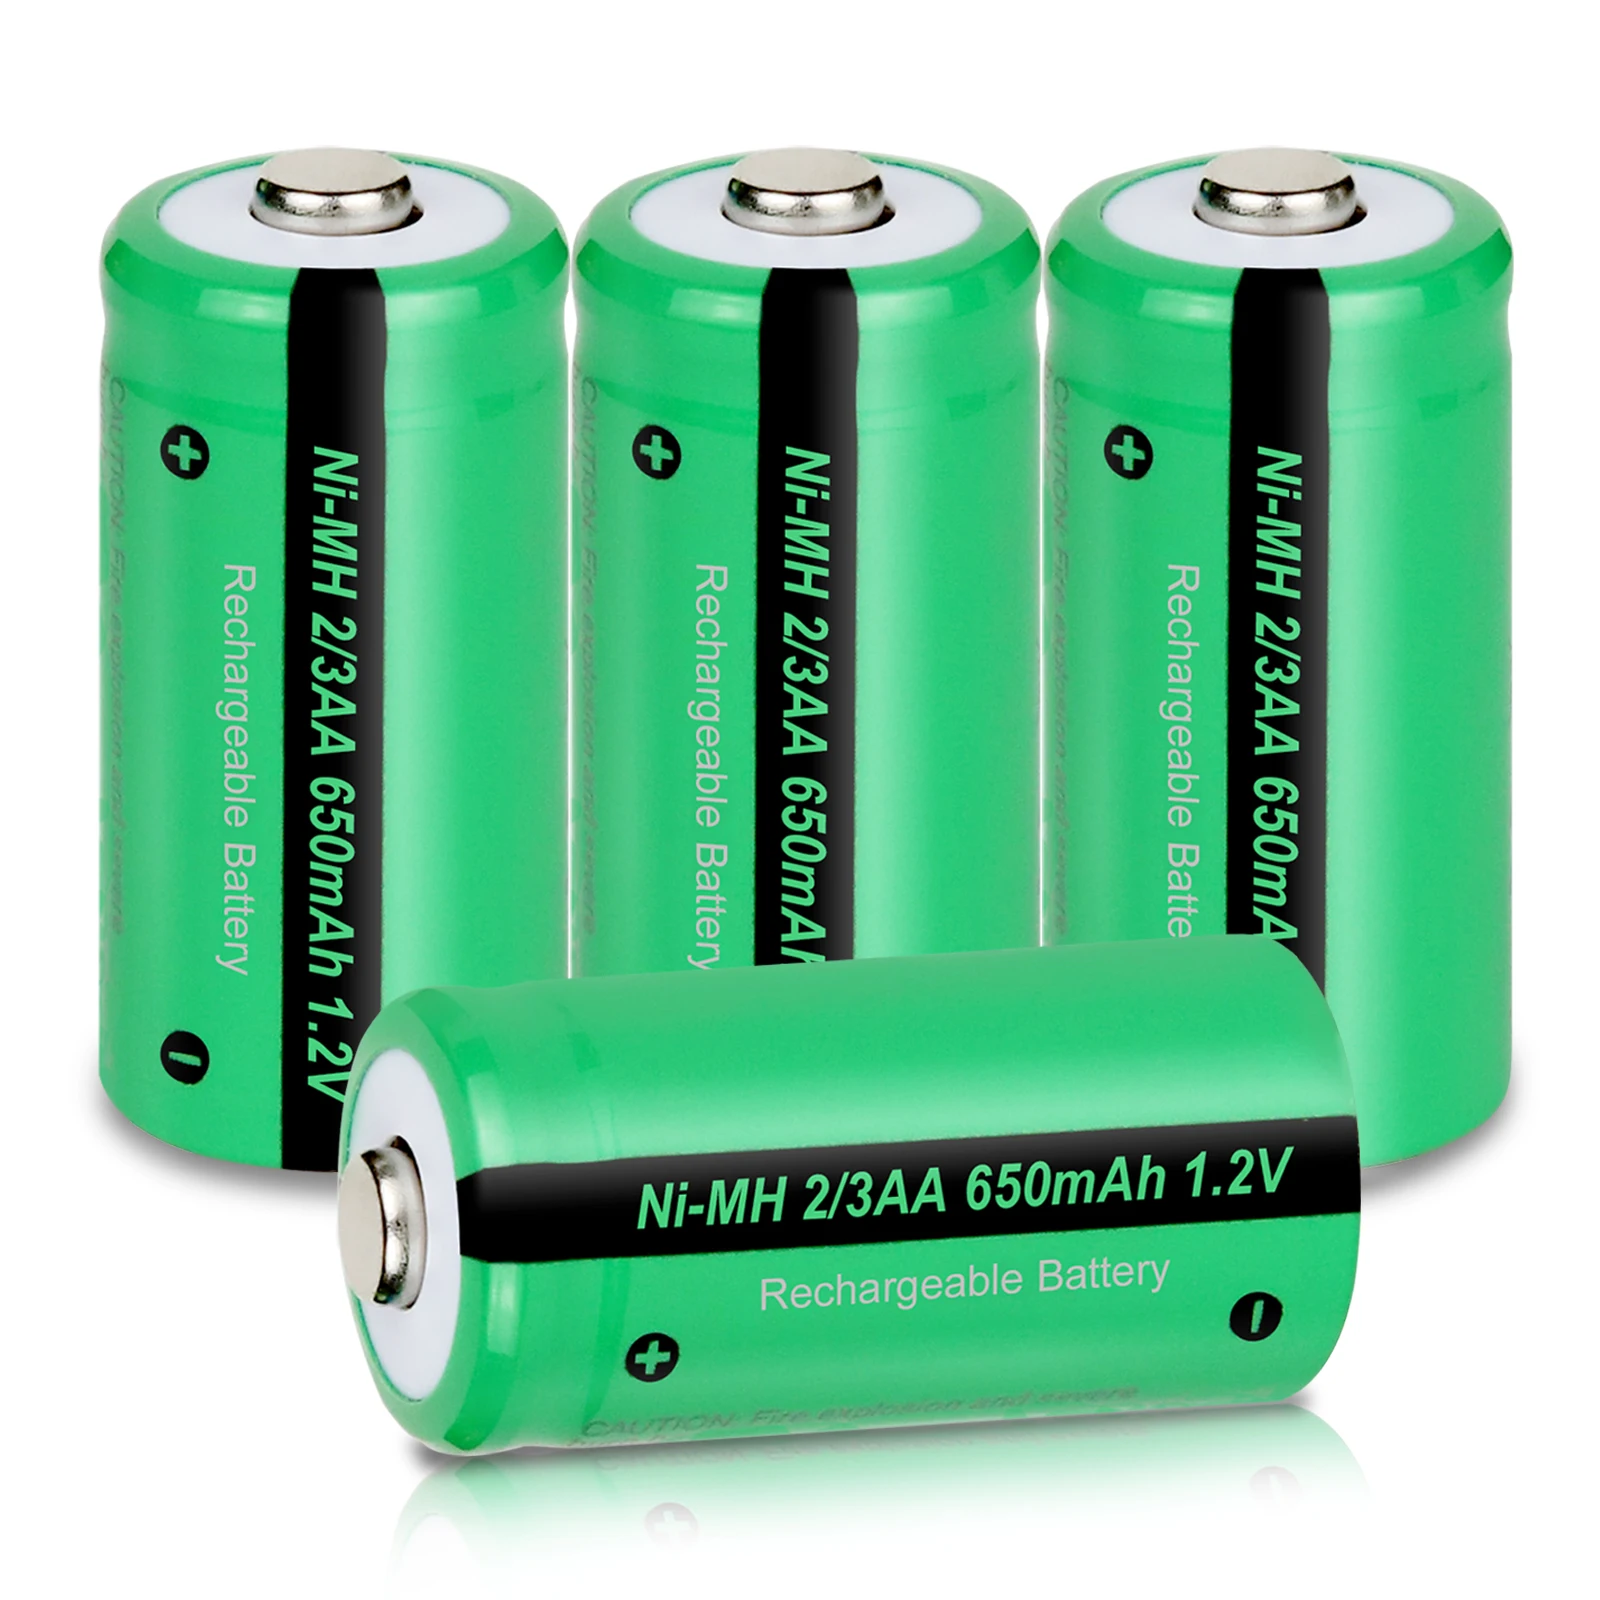 

4PC PKCELL 2/3 AA 650mAh 1.2V NiMh Rechargeable Battery Ni-Mh Batteries Industrial Button top